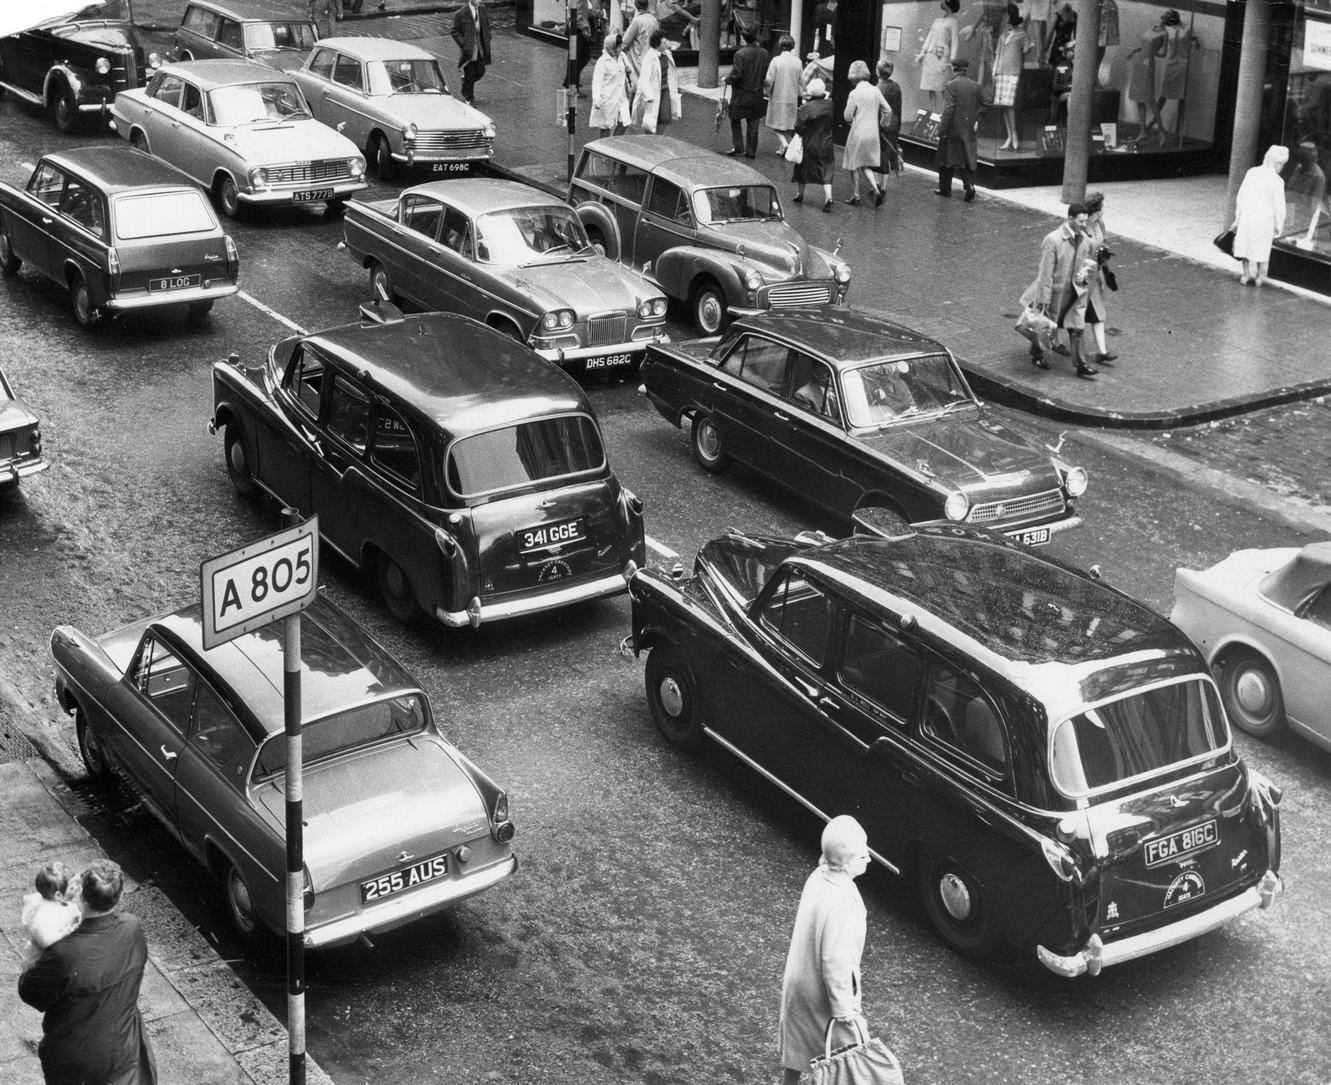 Taxis in a Glasgow street, stuck in traffic around the city centre, August 1965.